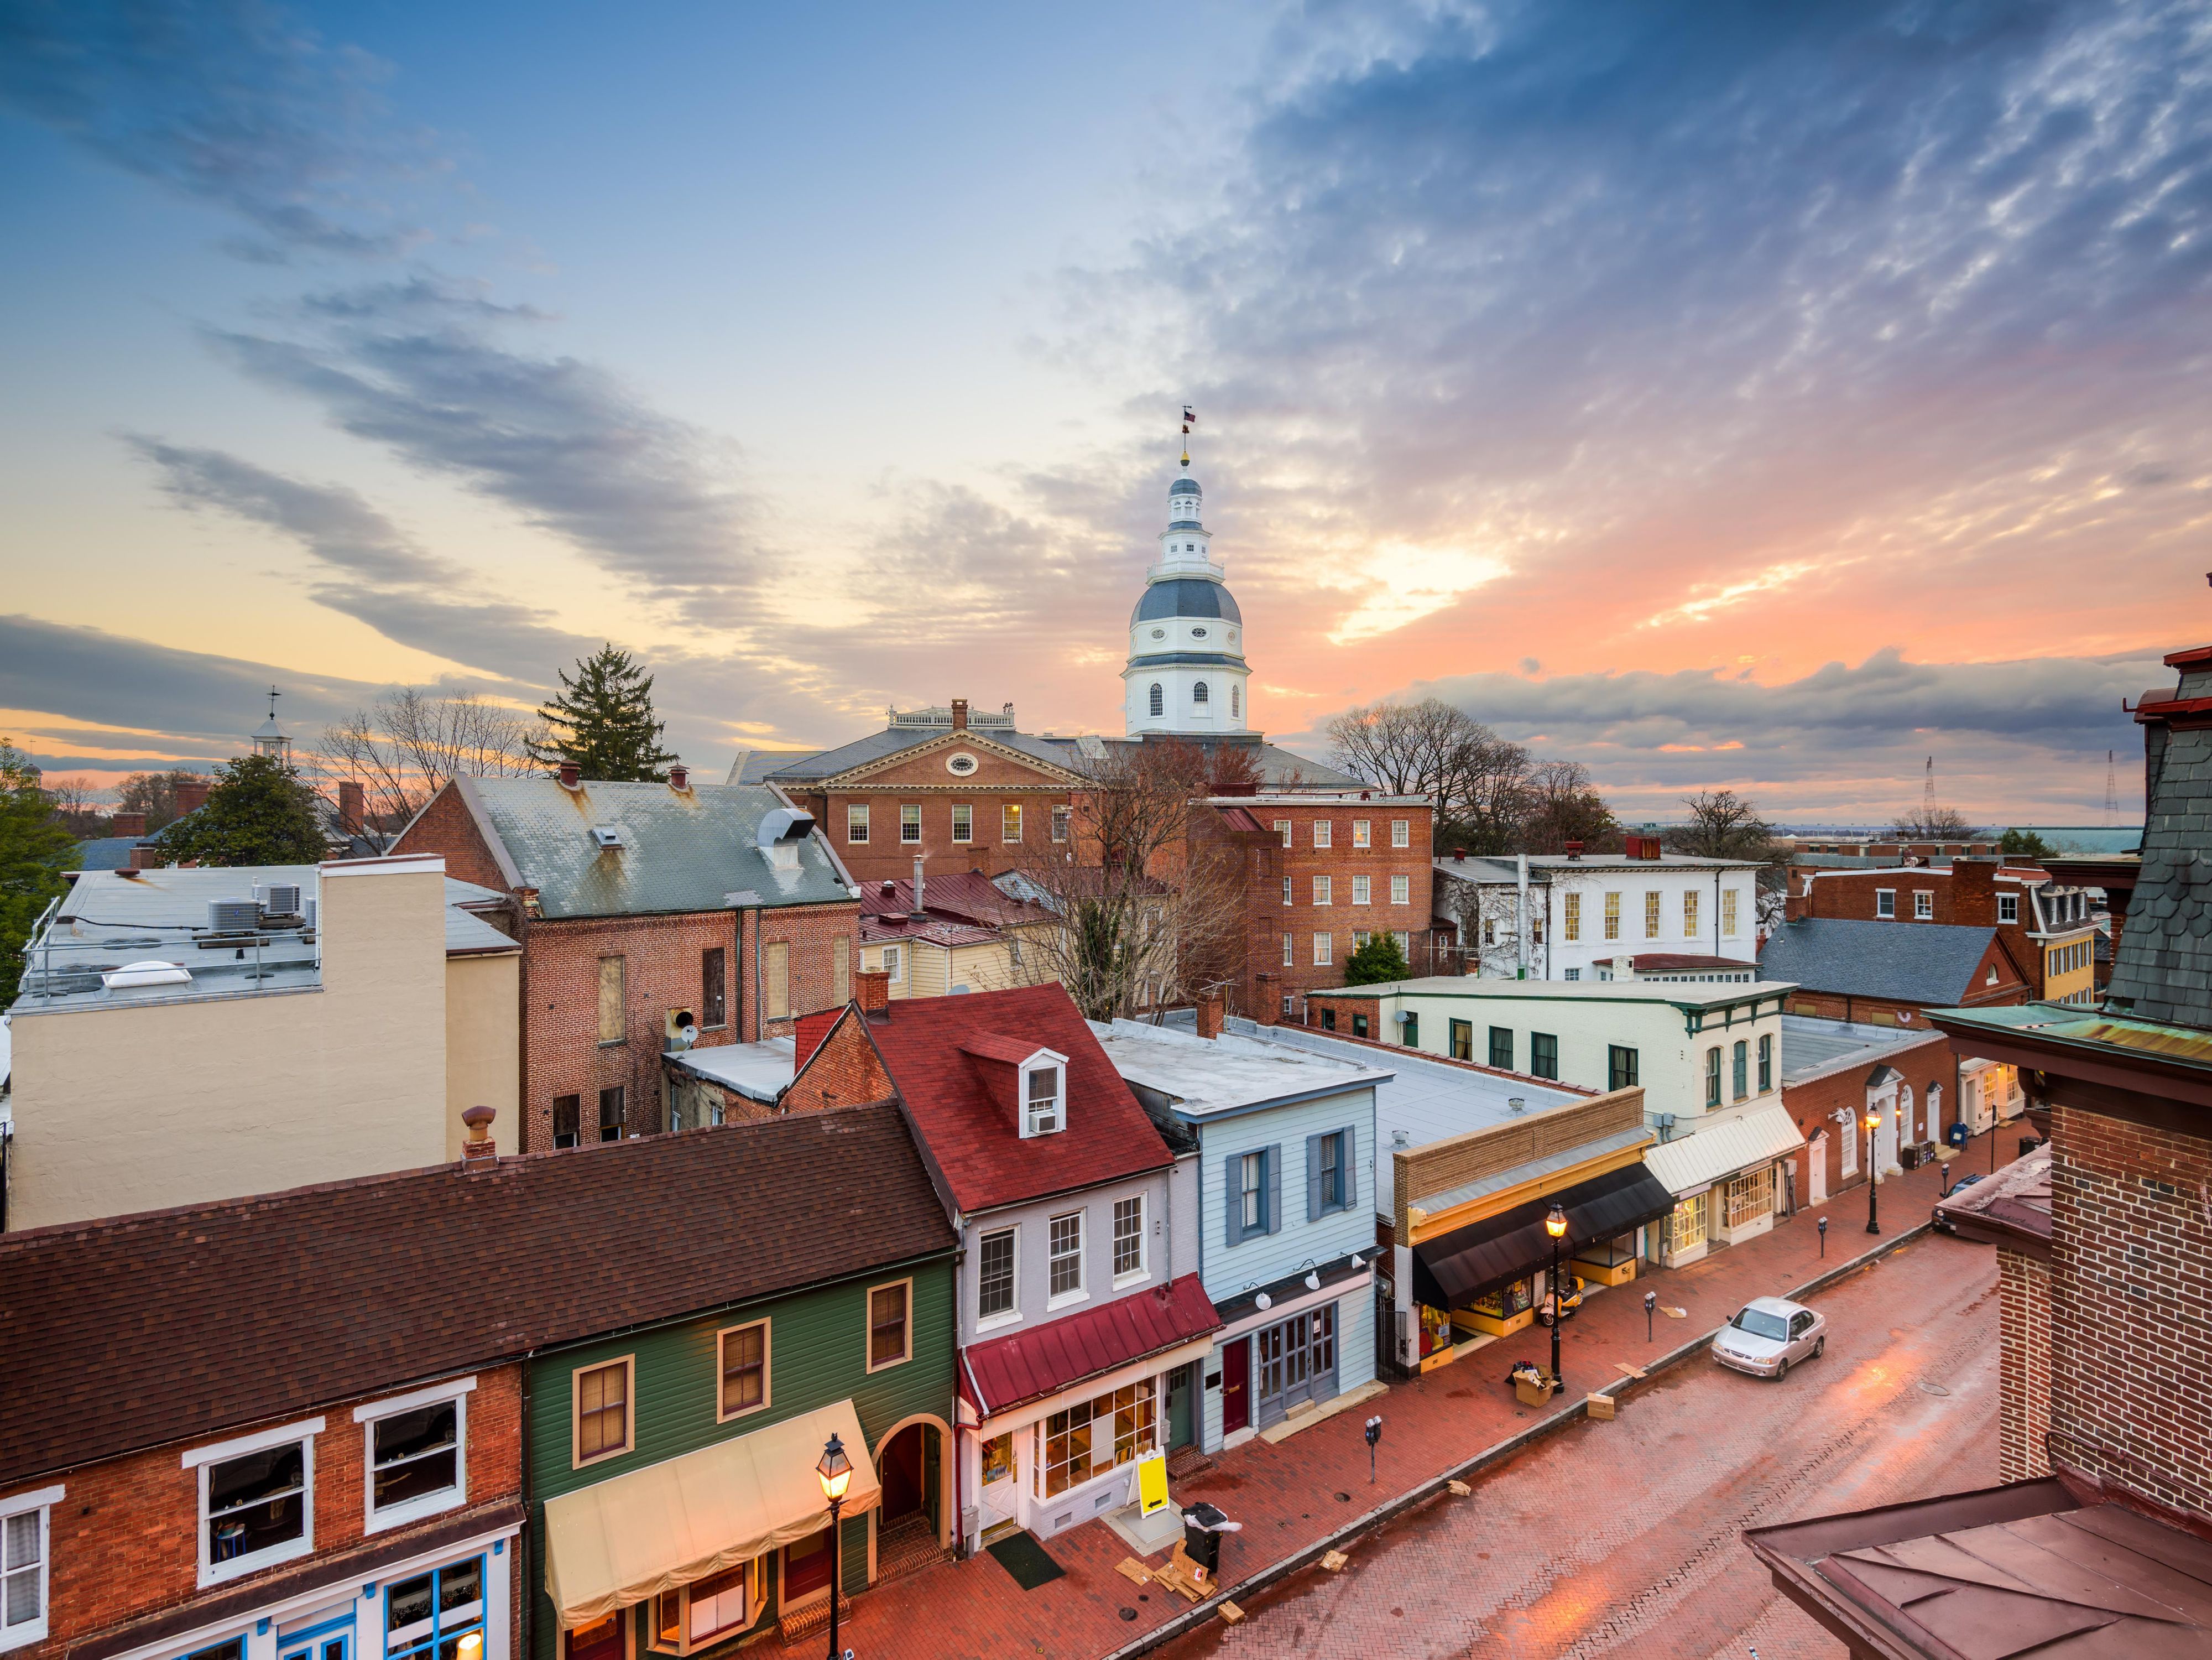 Explore historical Annapolis with a walking or trolley tour or set sail for the Chesapeake Bay on a cruise with Watermark Cruises boat tour. See Annapolis from a horse-drawn carriage. Shop at the boutique shops of Downtown Annapolis or enjoy delicious local cuisine from waterfront Annapolis restaurants.